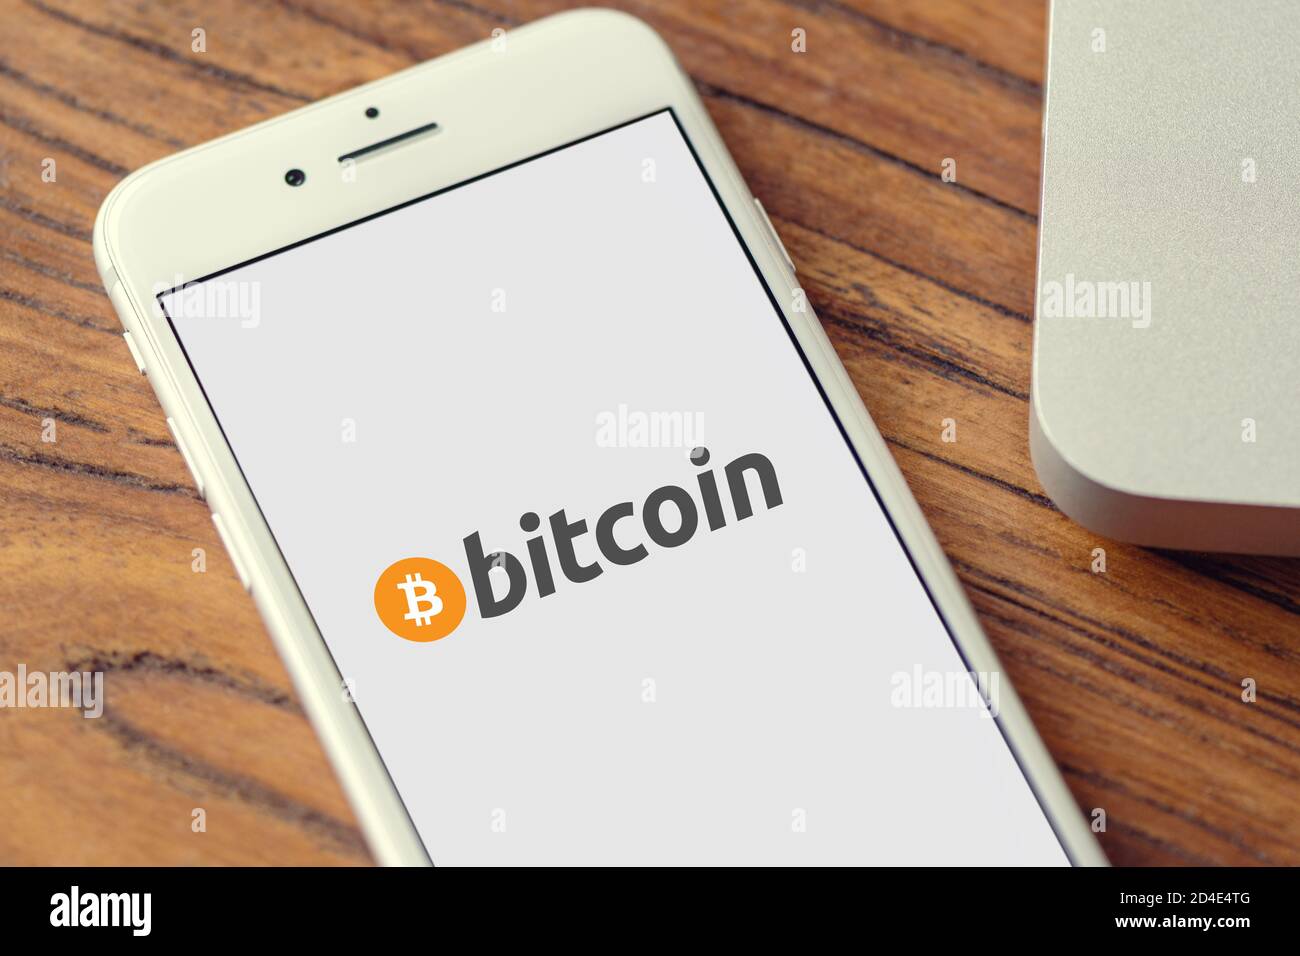 Guilherand-Granges, France - October 09, 2020. Smartphone with Bitcoin logo. Cryptocurrency. Decentralized digital currency. Stock Photo